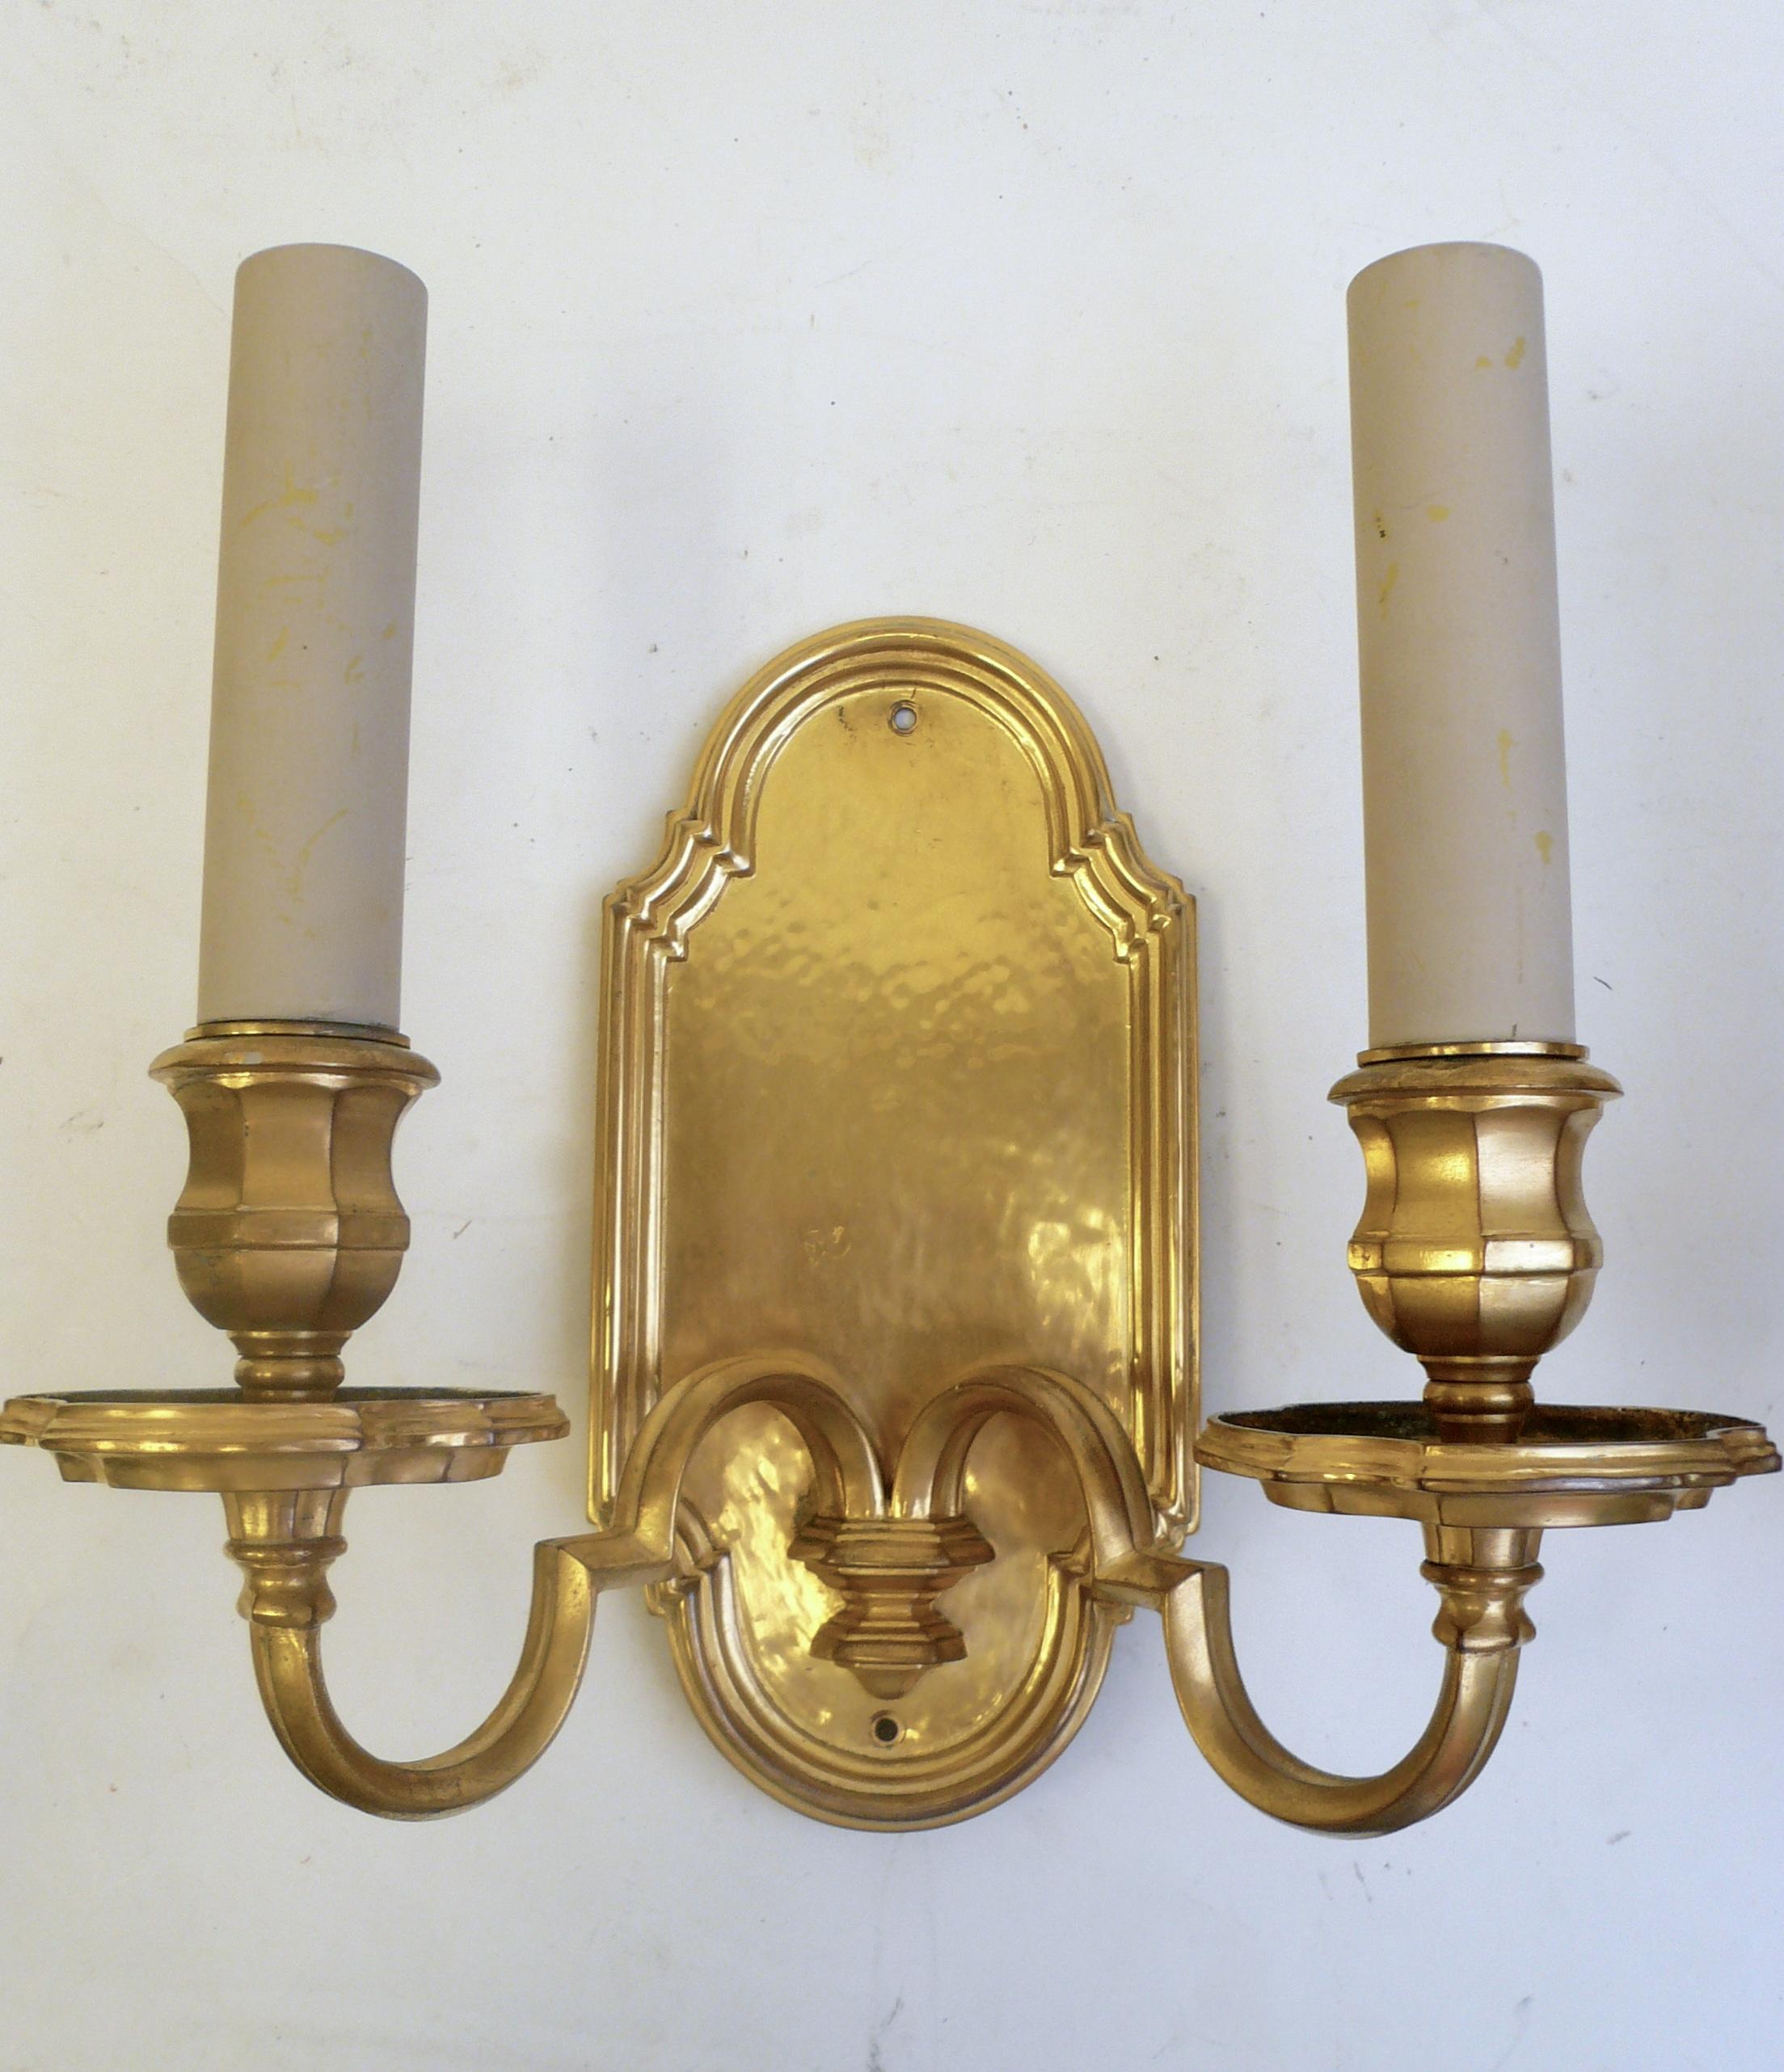 This handsome pair of Old English style Caldwell sconces are finely detailed, and have a mellow gilt finish. Originally from the library of 